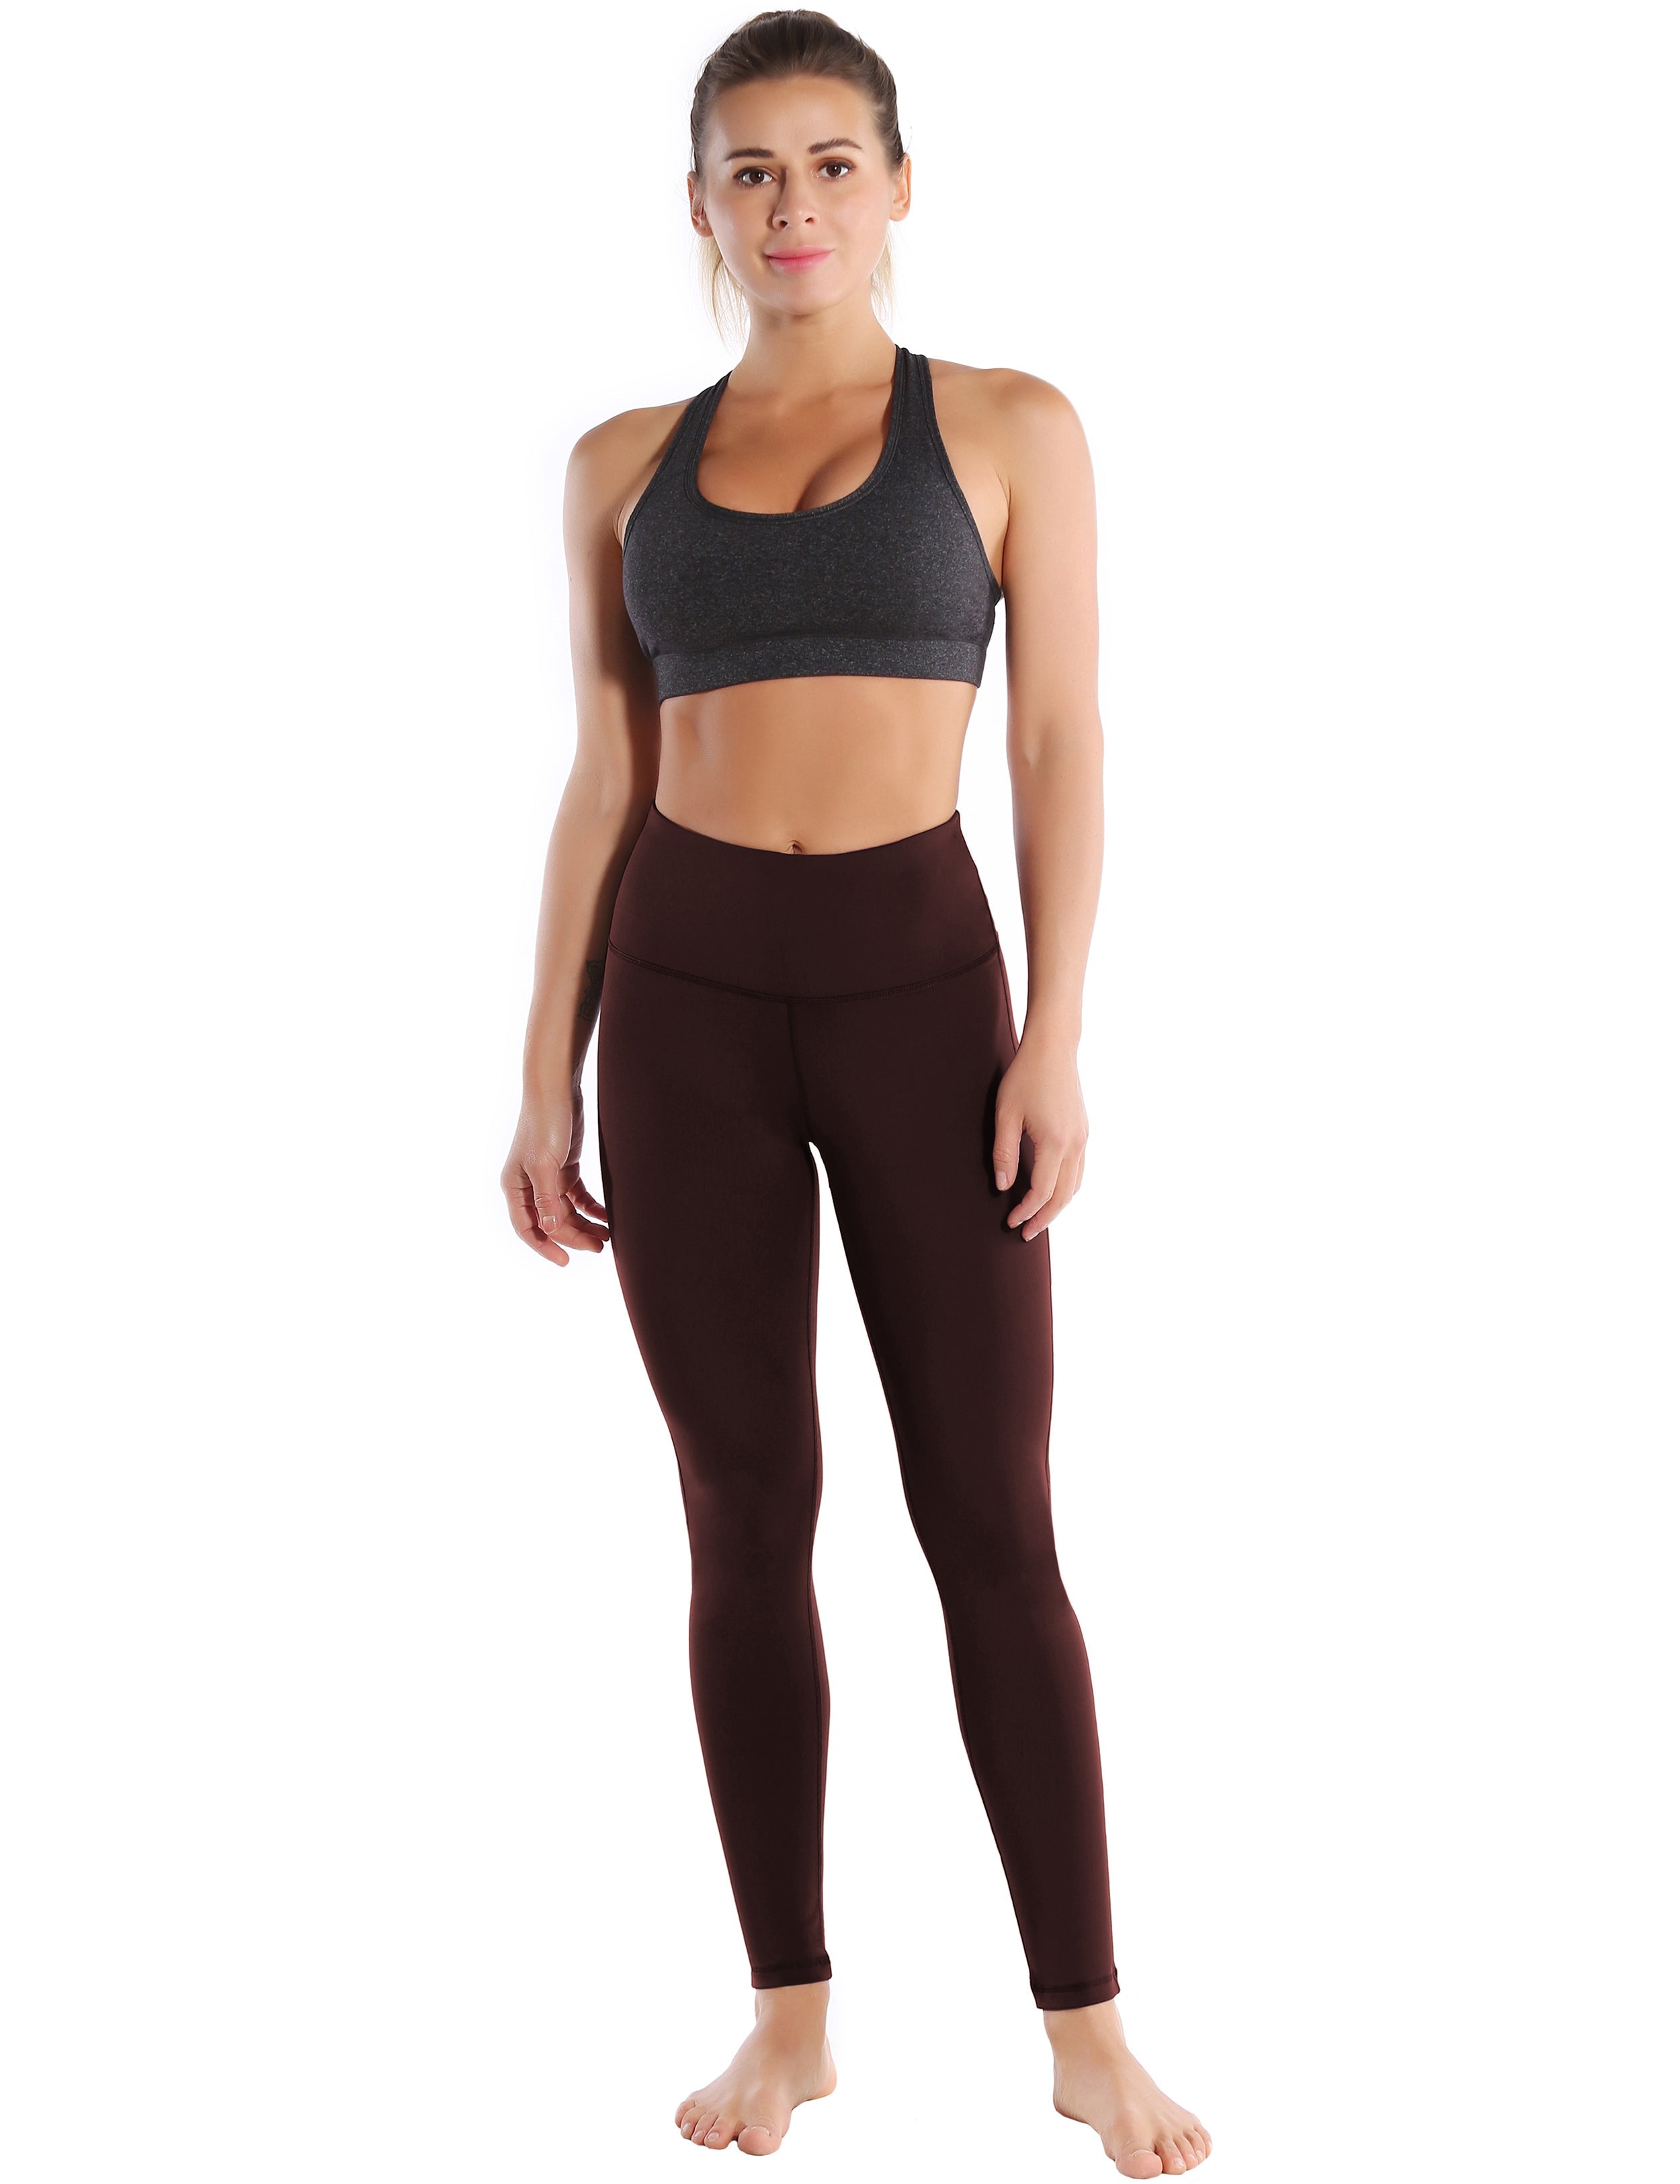 High Waist Side Line Golf Pants mahoganymaroon Side Line is Make Your Legs Look Longer and Thinner 75%Nylon/25%Spandex Fabric doesn't attract lint easily 4-way stretch No see-through Moisture-wicking Tummy control Inner pocket Two lengths